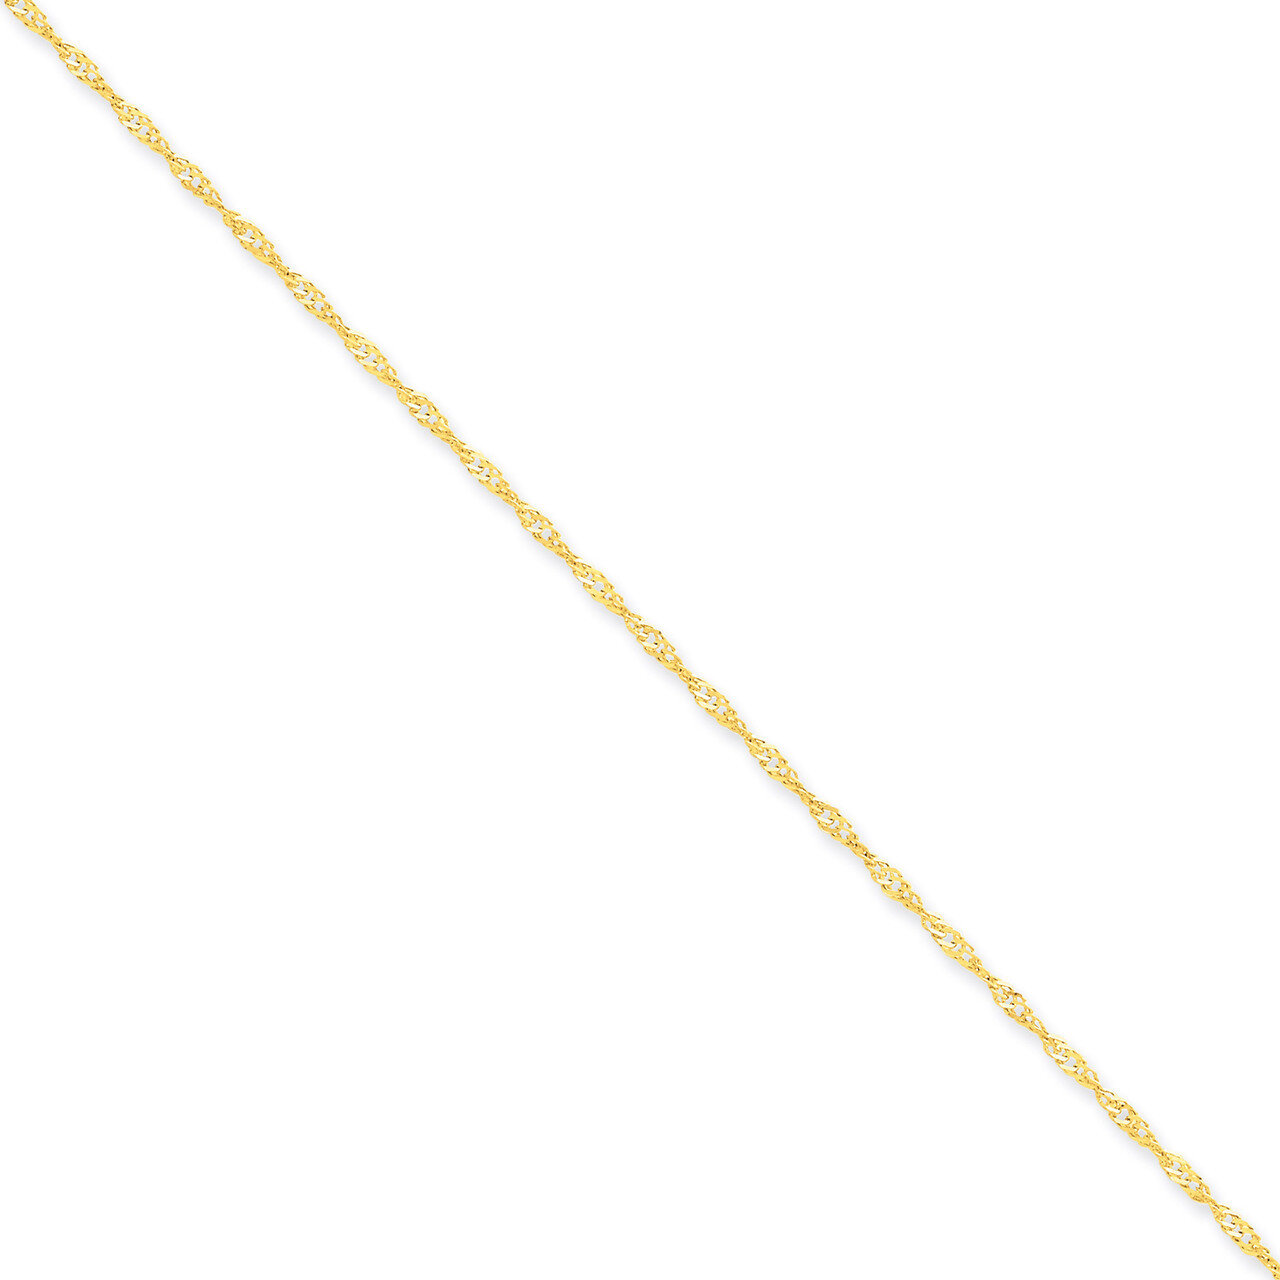 1.6mm Singapore Chain Anklet 9 Inch 14k Gold PEN52-9